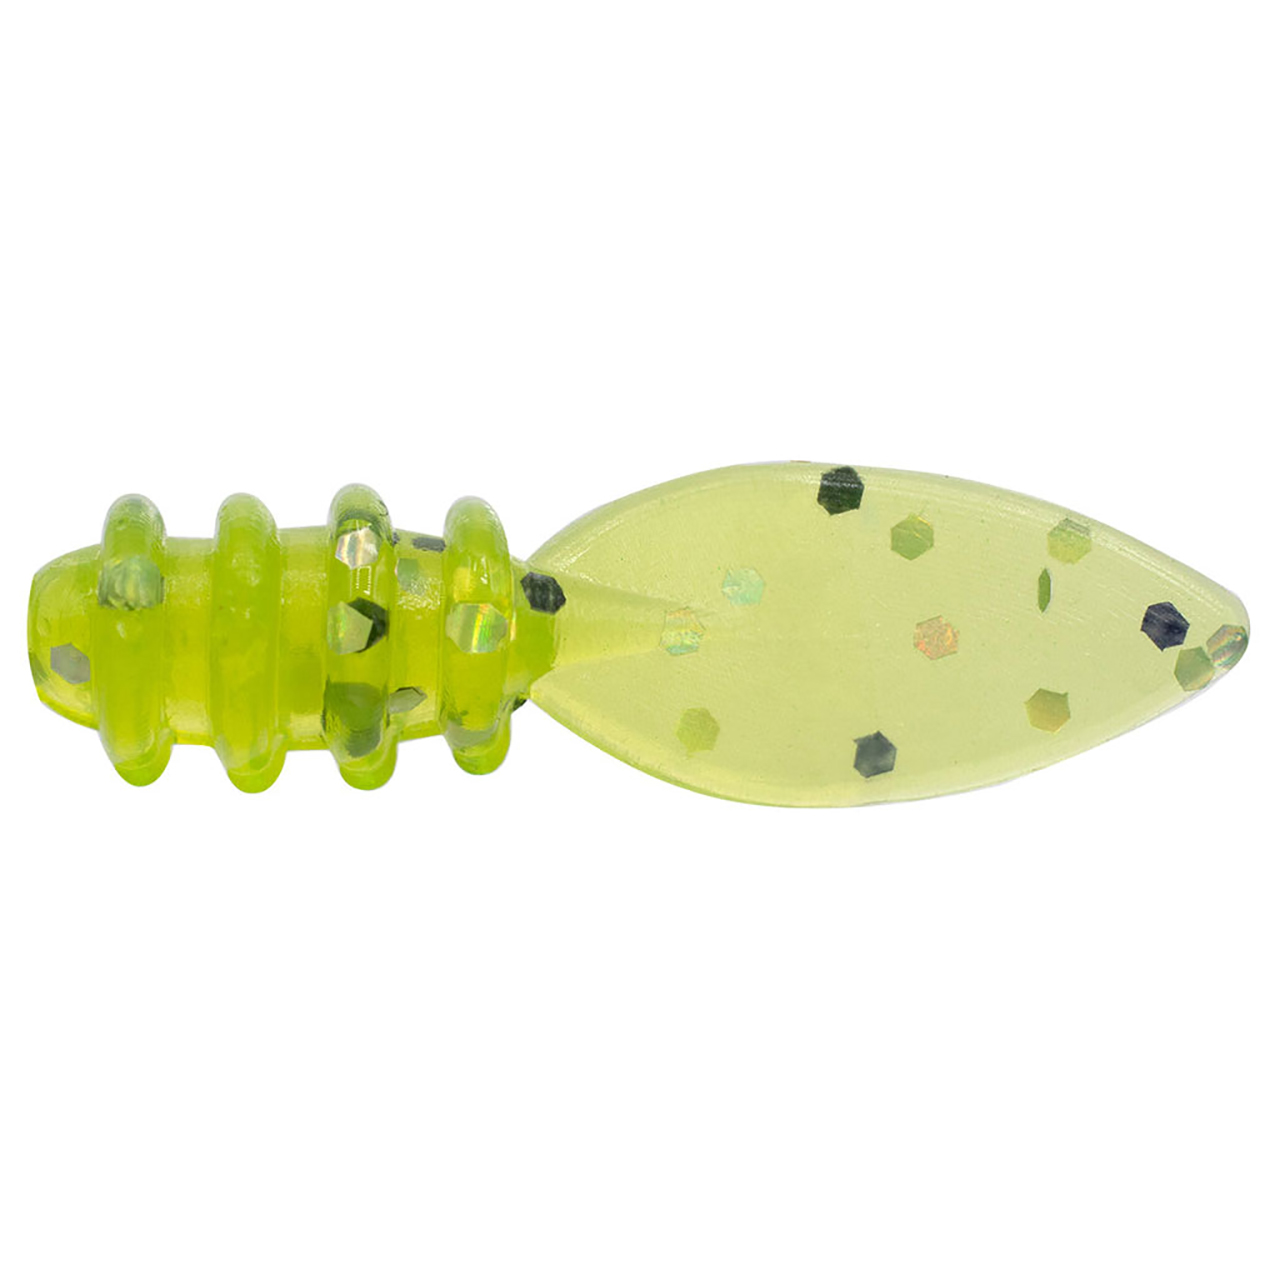 1 Wiggler GLOW Micro Plastic Ice Fishing Jigs Creature Crappie Trout Perch  Bluegill Paddle Tail Bug 